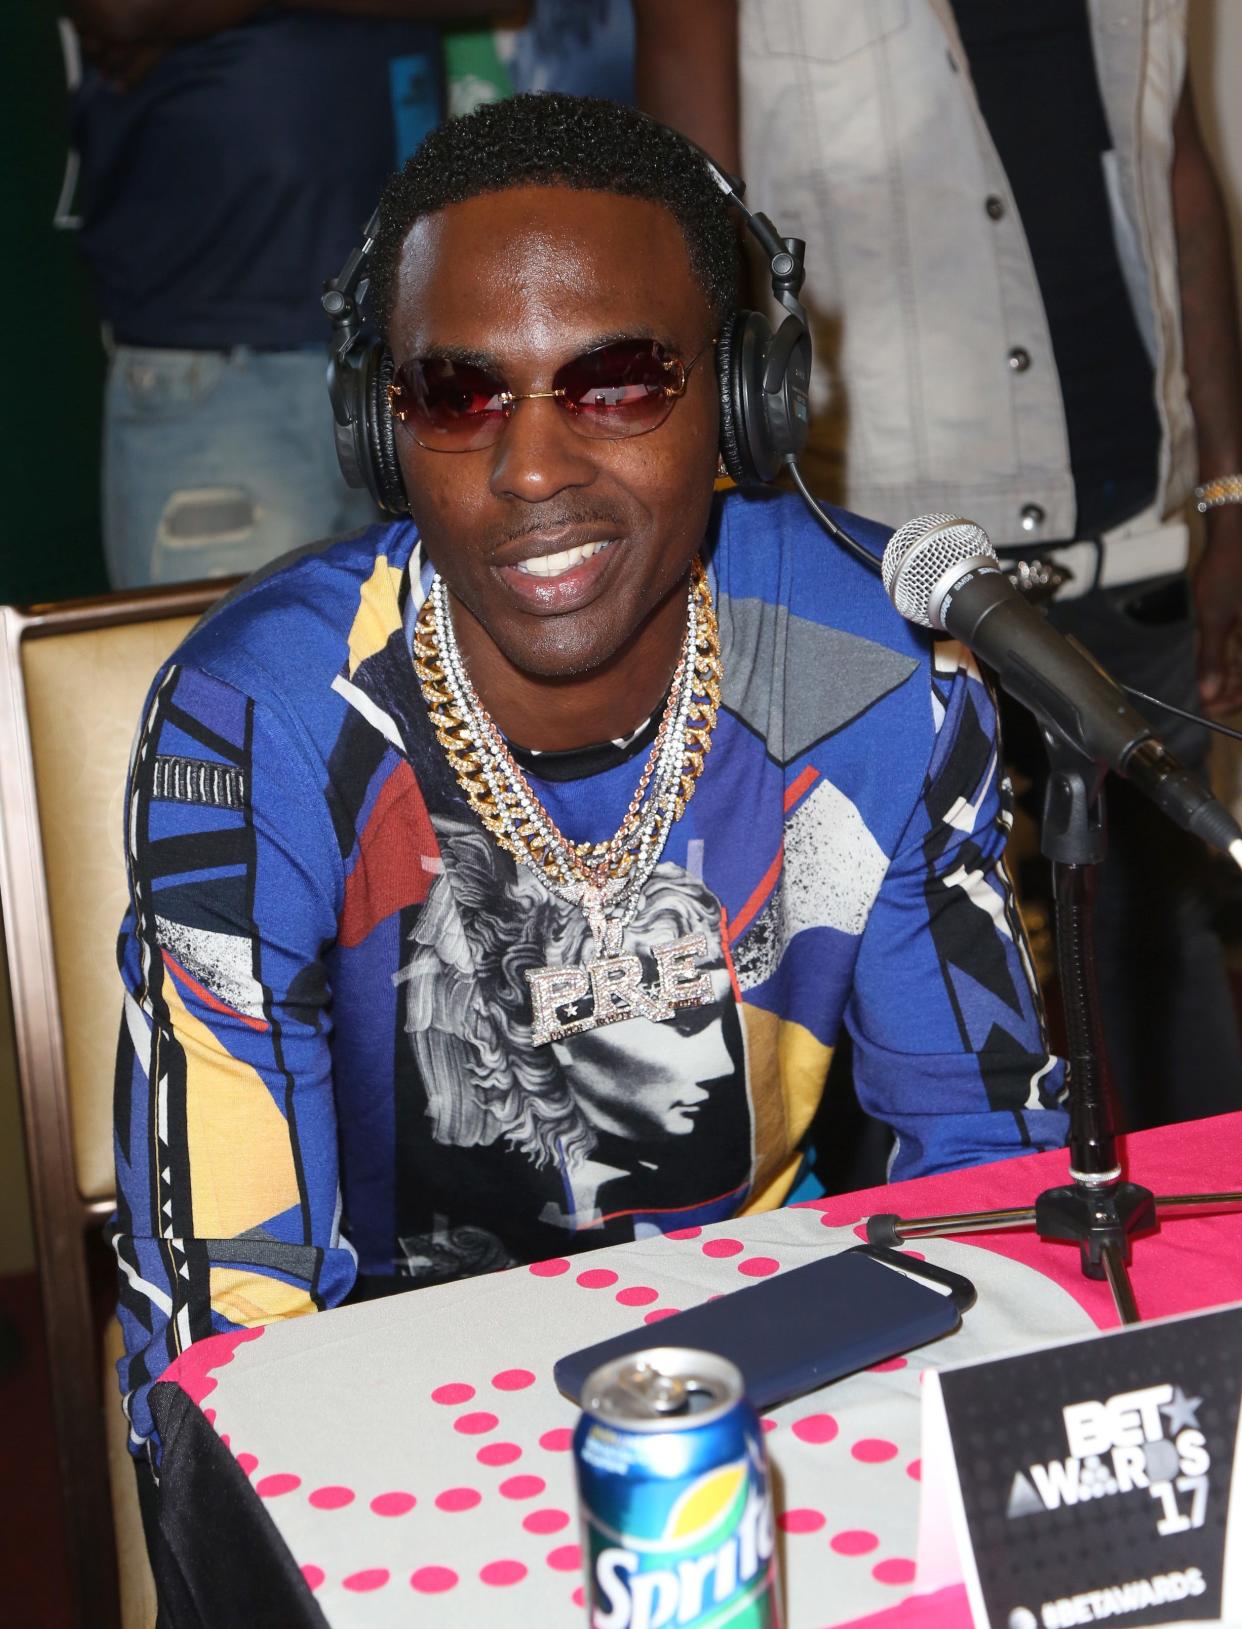 Rapper Young Dolph was shot and killed in Memphis. He was 36.